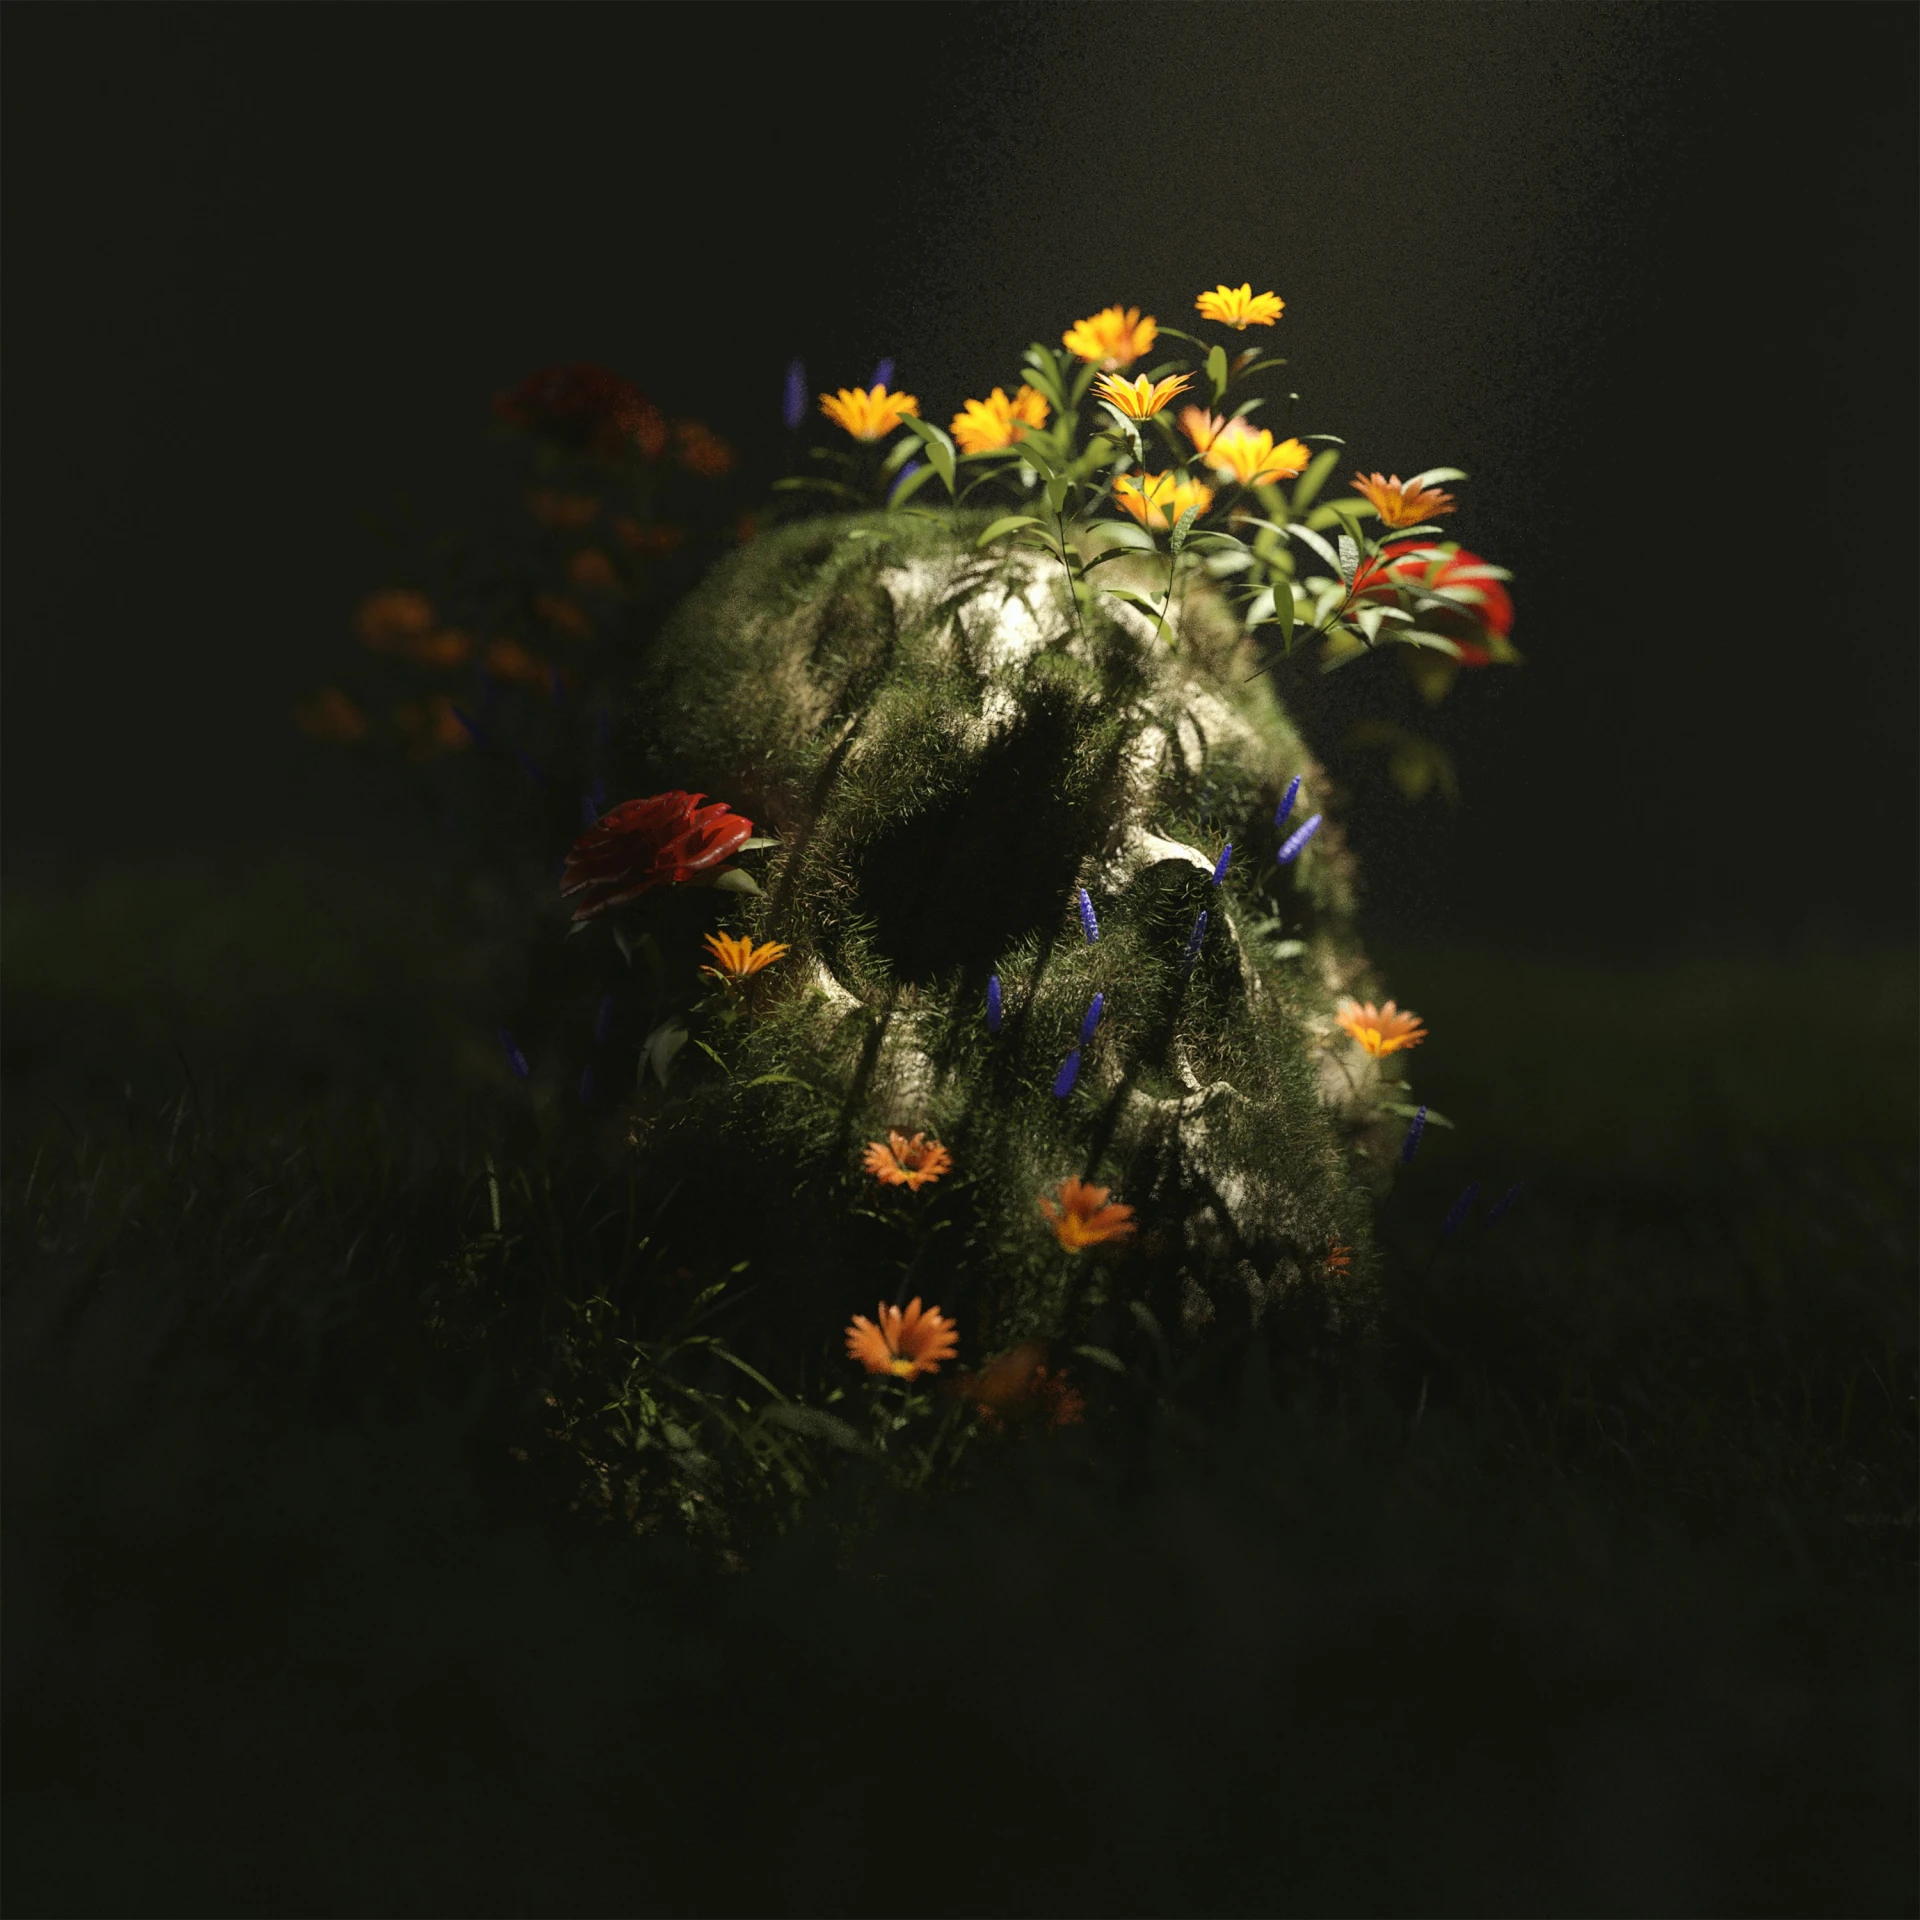 colorful flowers surround the skull sculpture in the dark